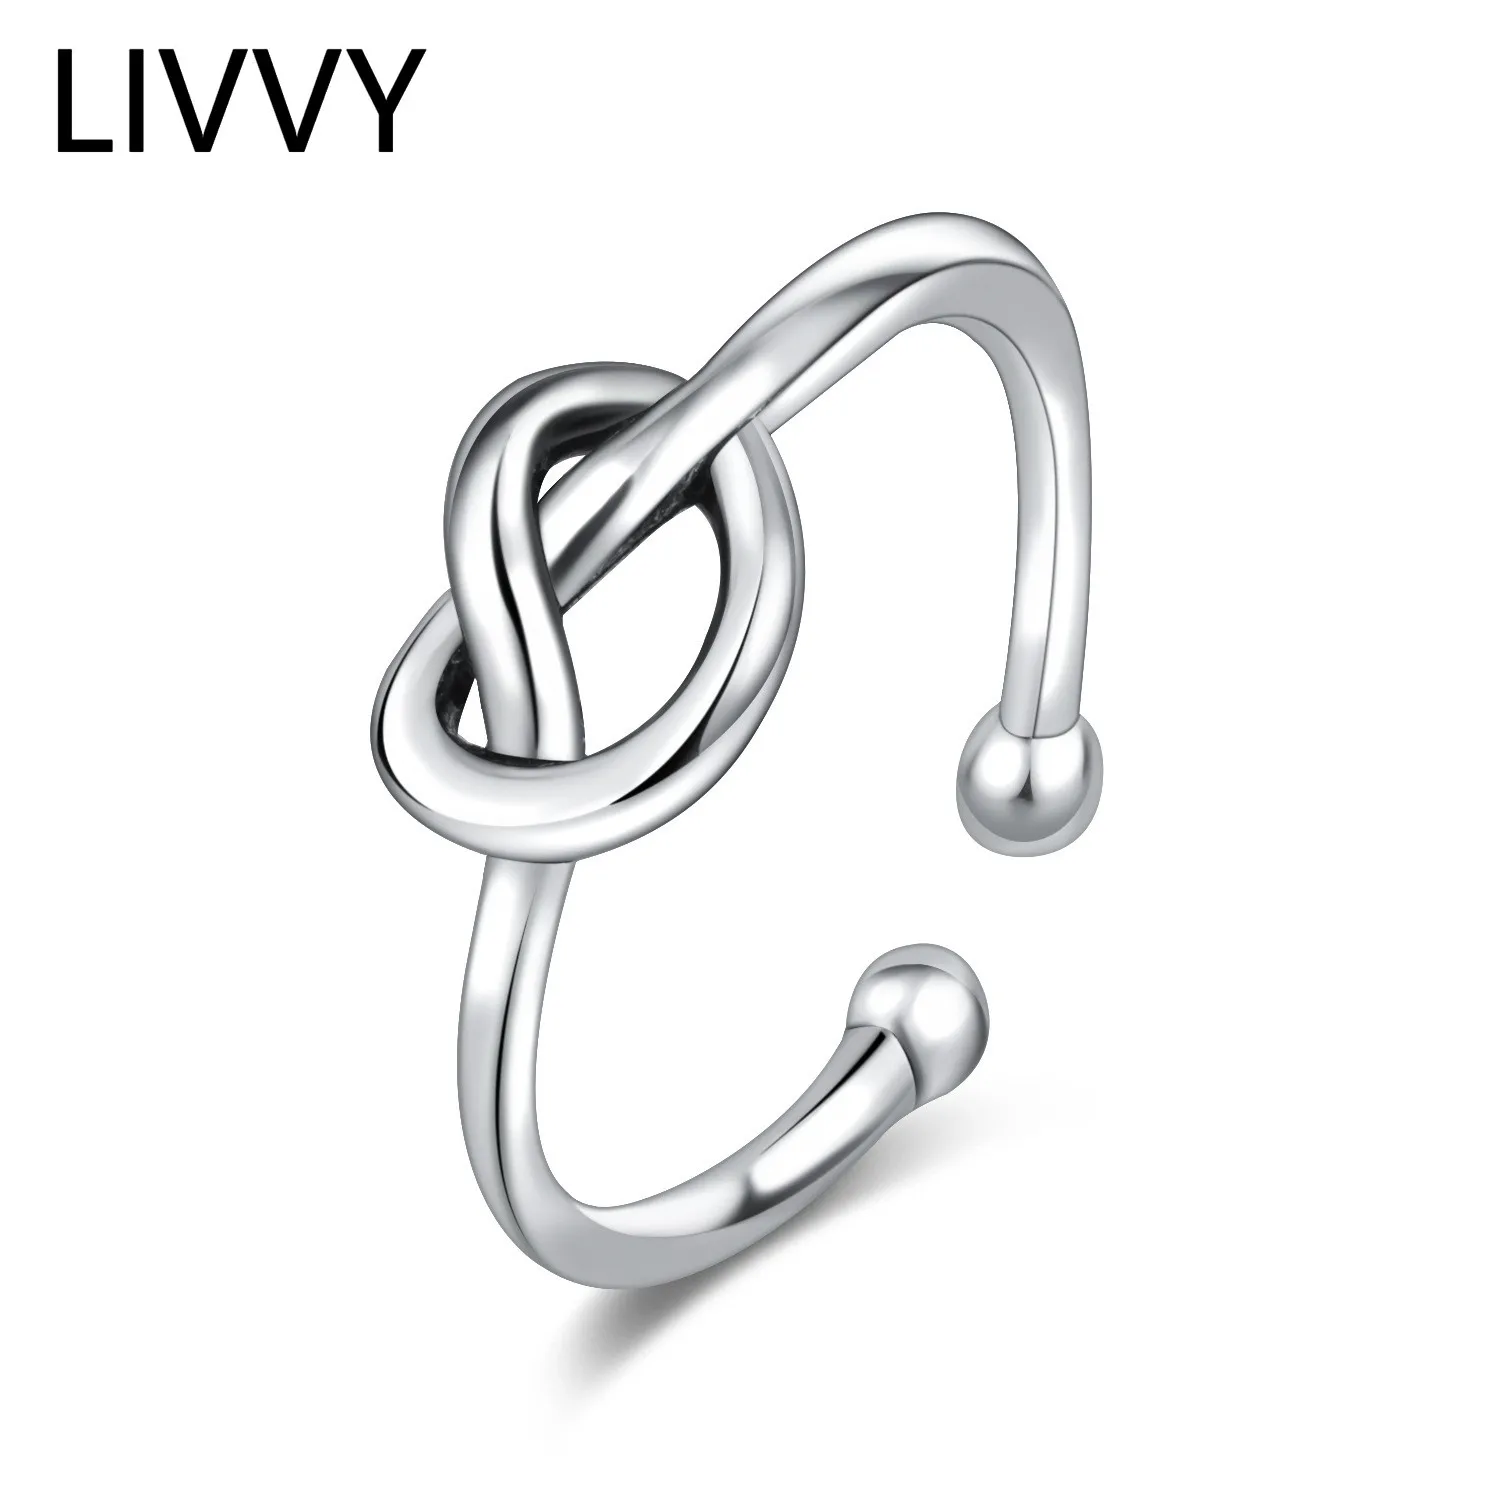 

LIVVY Silver Color New Hollow Love Heart Cross Ring Trend Simple Fashion Creative Jewelry Lover Gift Кольцо 2021 Trend